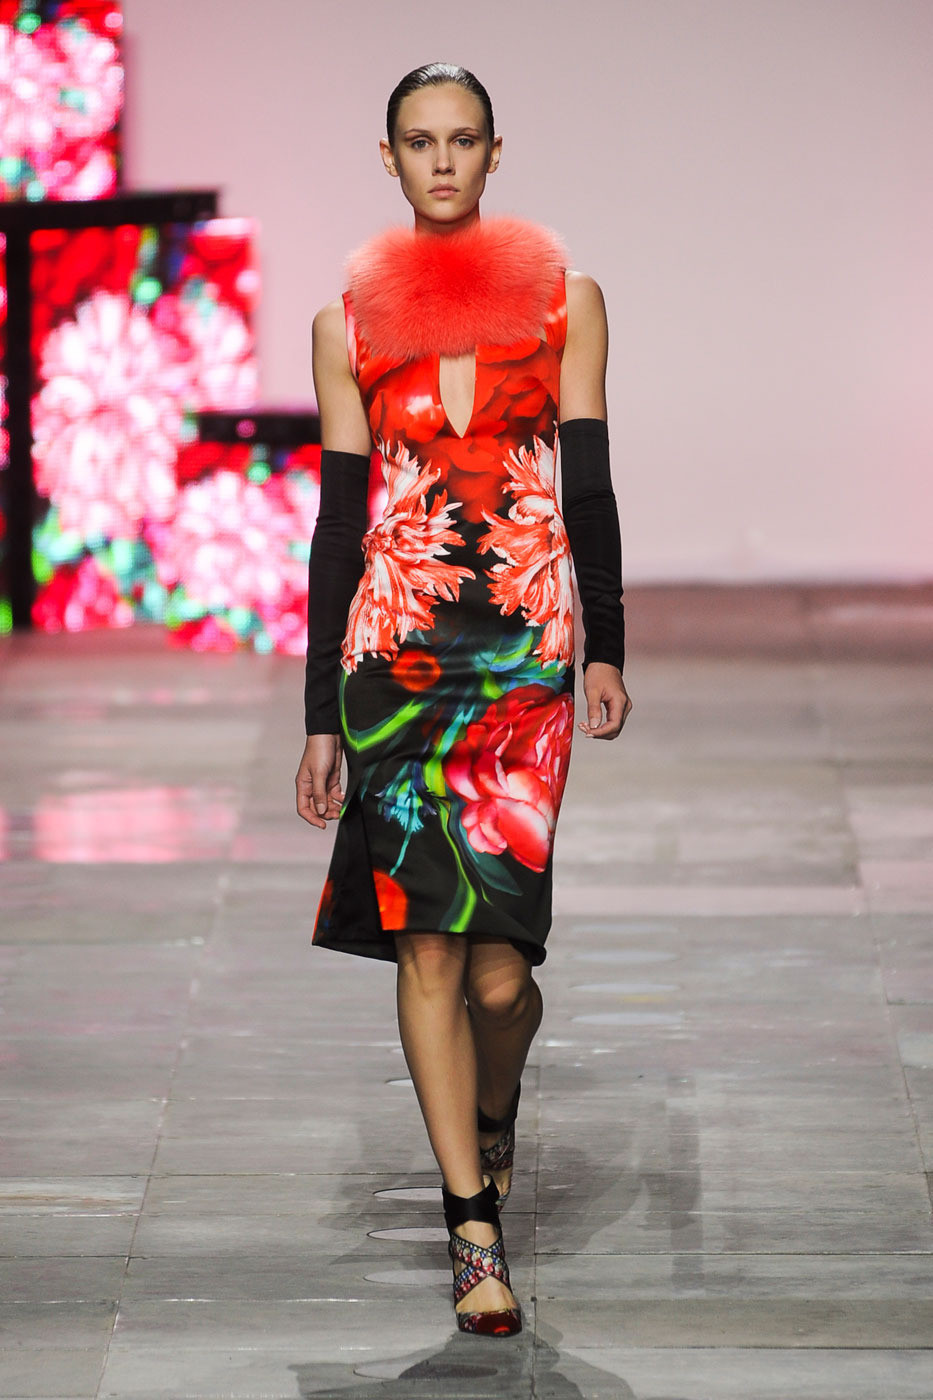 Peter Pilotto Fall 2012 t Igt Vi Oh 7 NCx 1